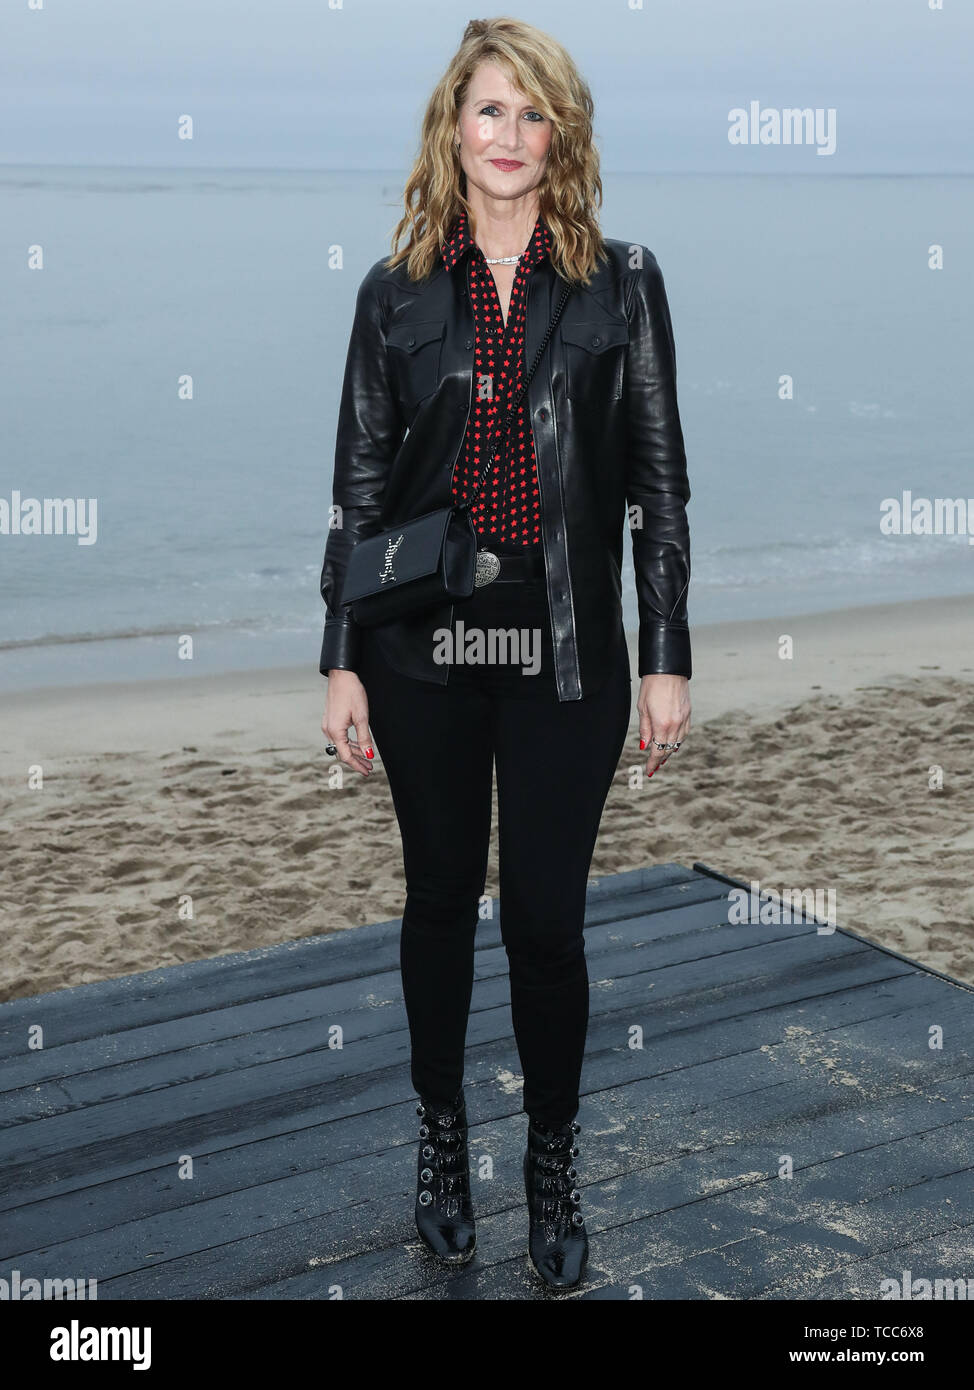 MALIBU, LOS ANGELES, CALIFORNIA, USA - JUNE 06: Actress Laura Dern arrives at the Saint Laurent Mens Spring Summer 20 Show held at Paradise Cove Beach on June 6, 2019 in Malibu, Los Angeles, California, United States. (Photo by Xavier Collin/Image Press Agency) Stock Photo